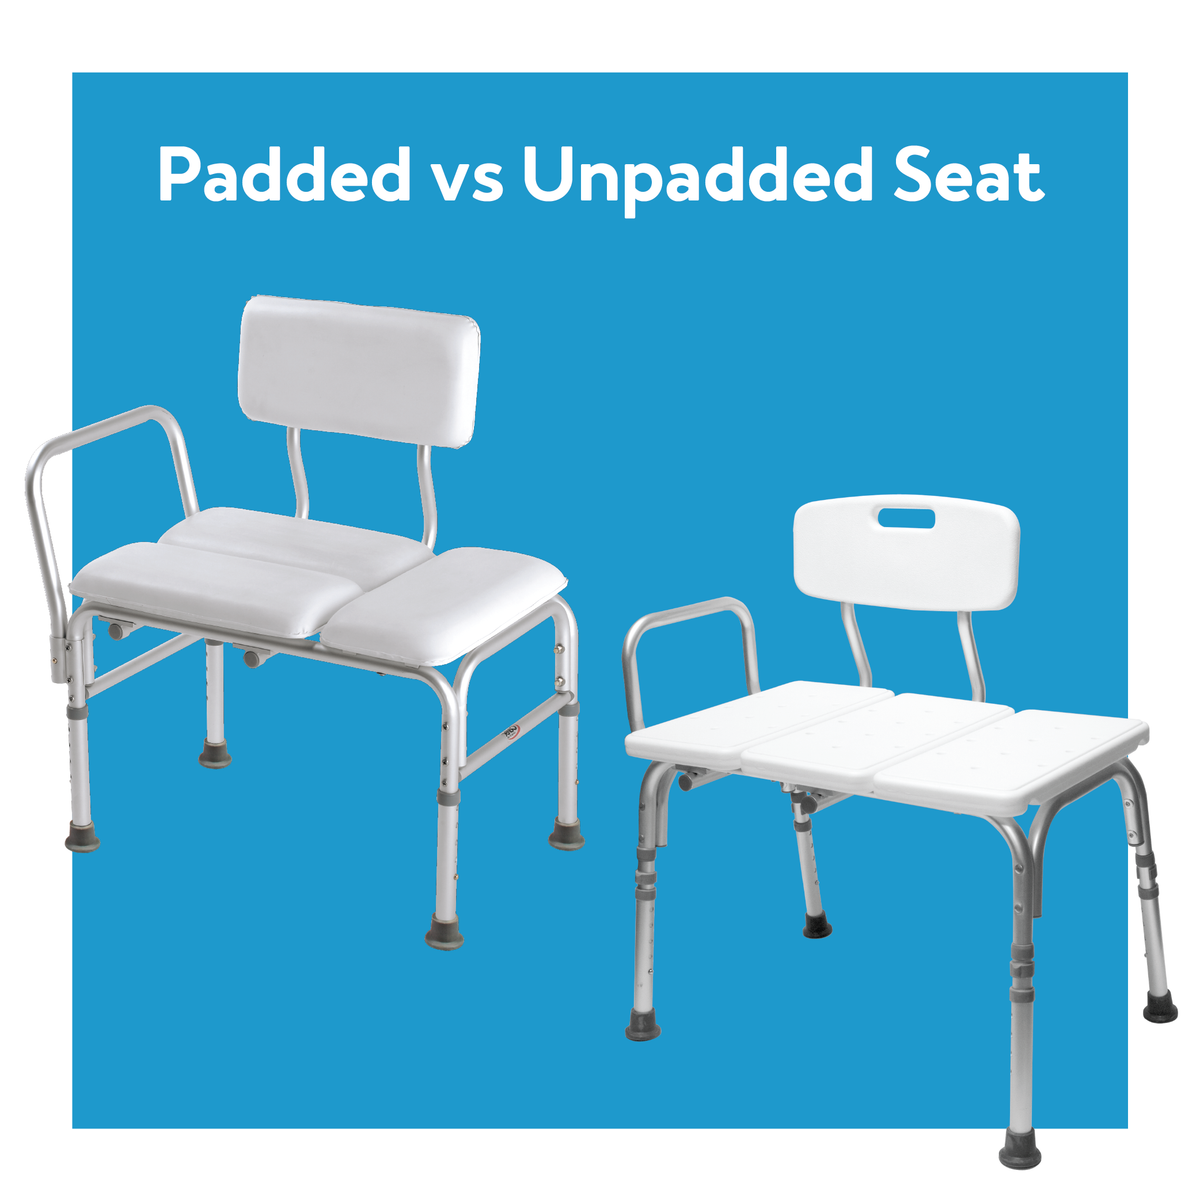 A padded transfer bench with an unpadded transfer bench. Text, padded vs unpadded seat